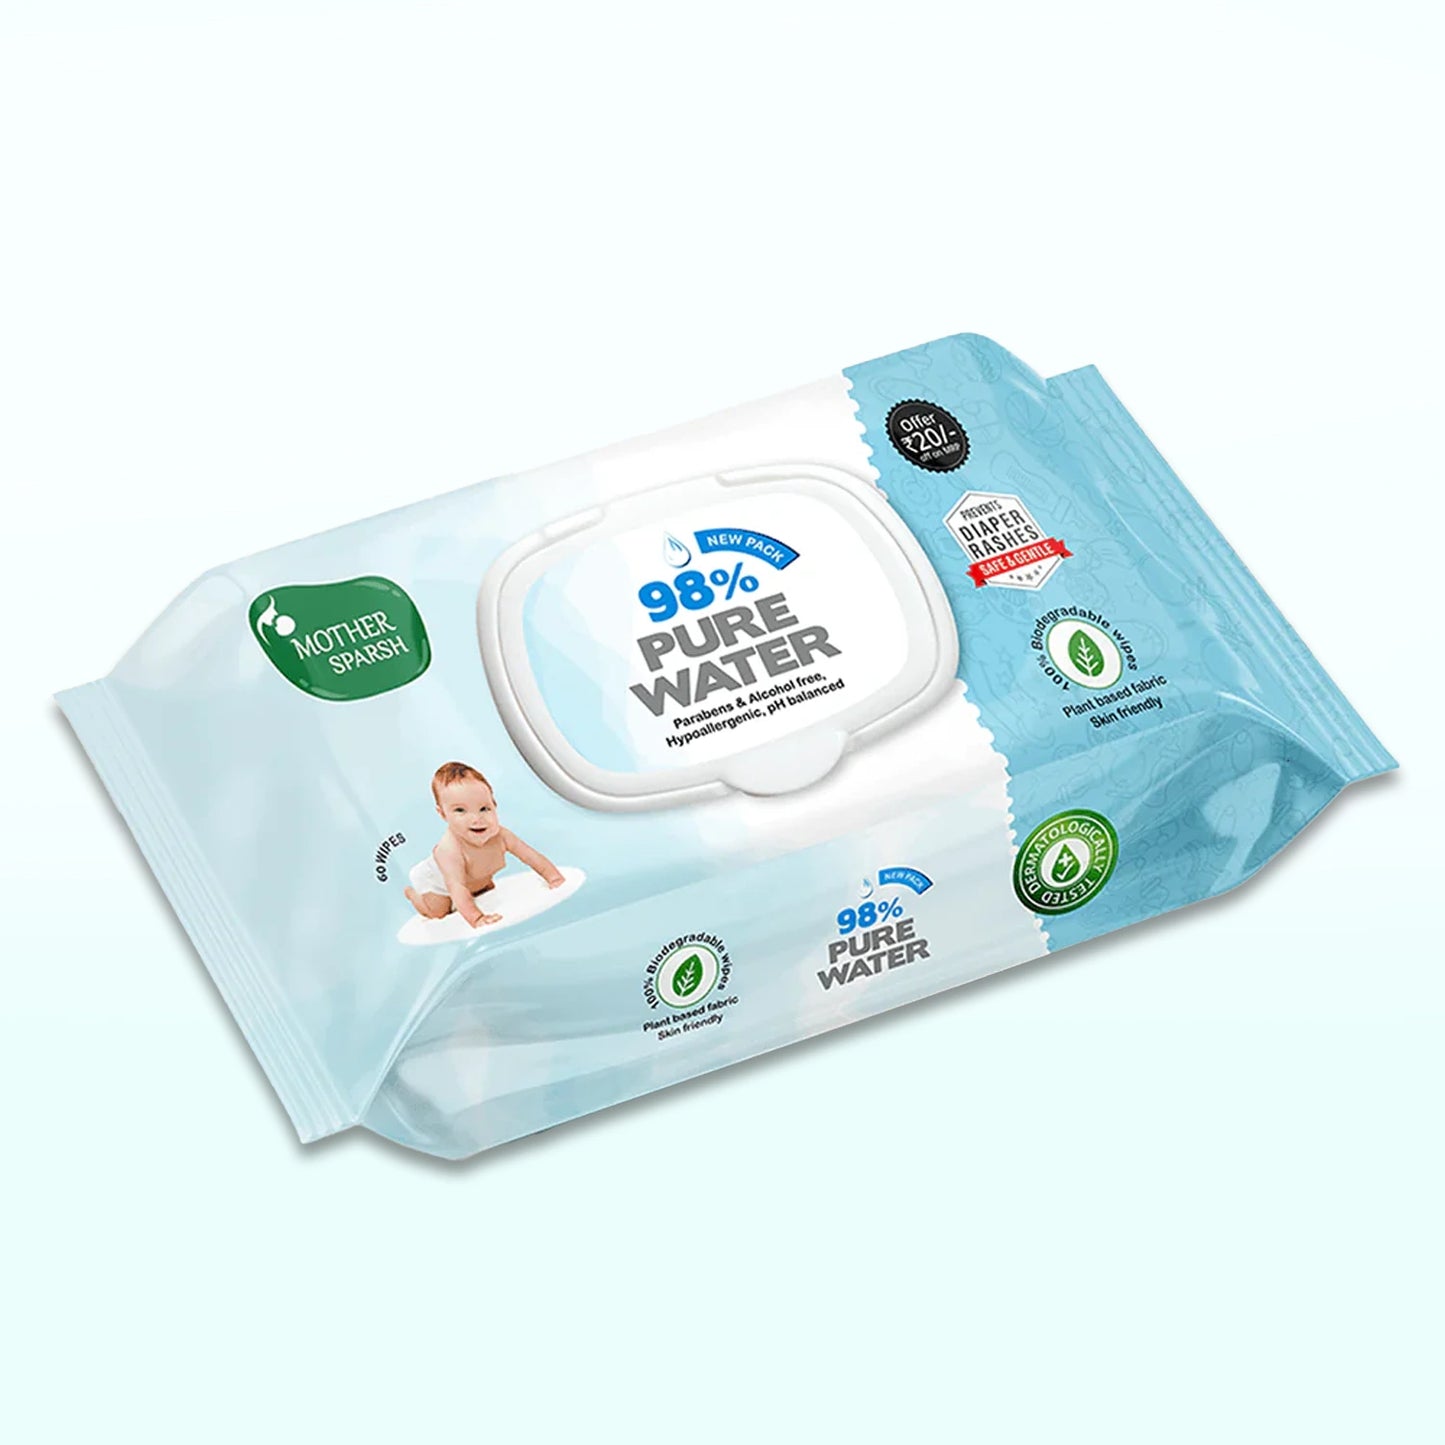 Gentle-wipes-for-baby-Ideal-for-sensitive-skin-Ideal-for-travel